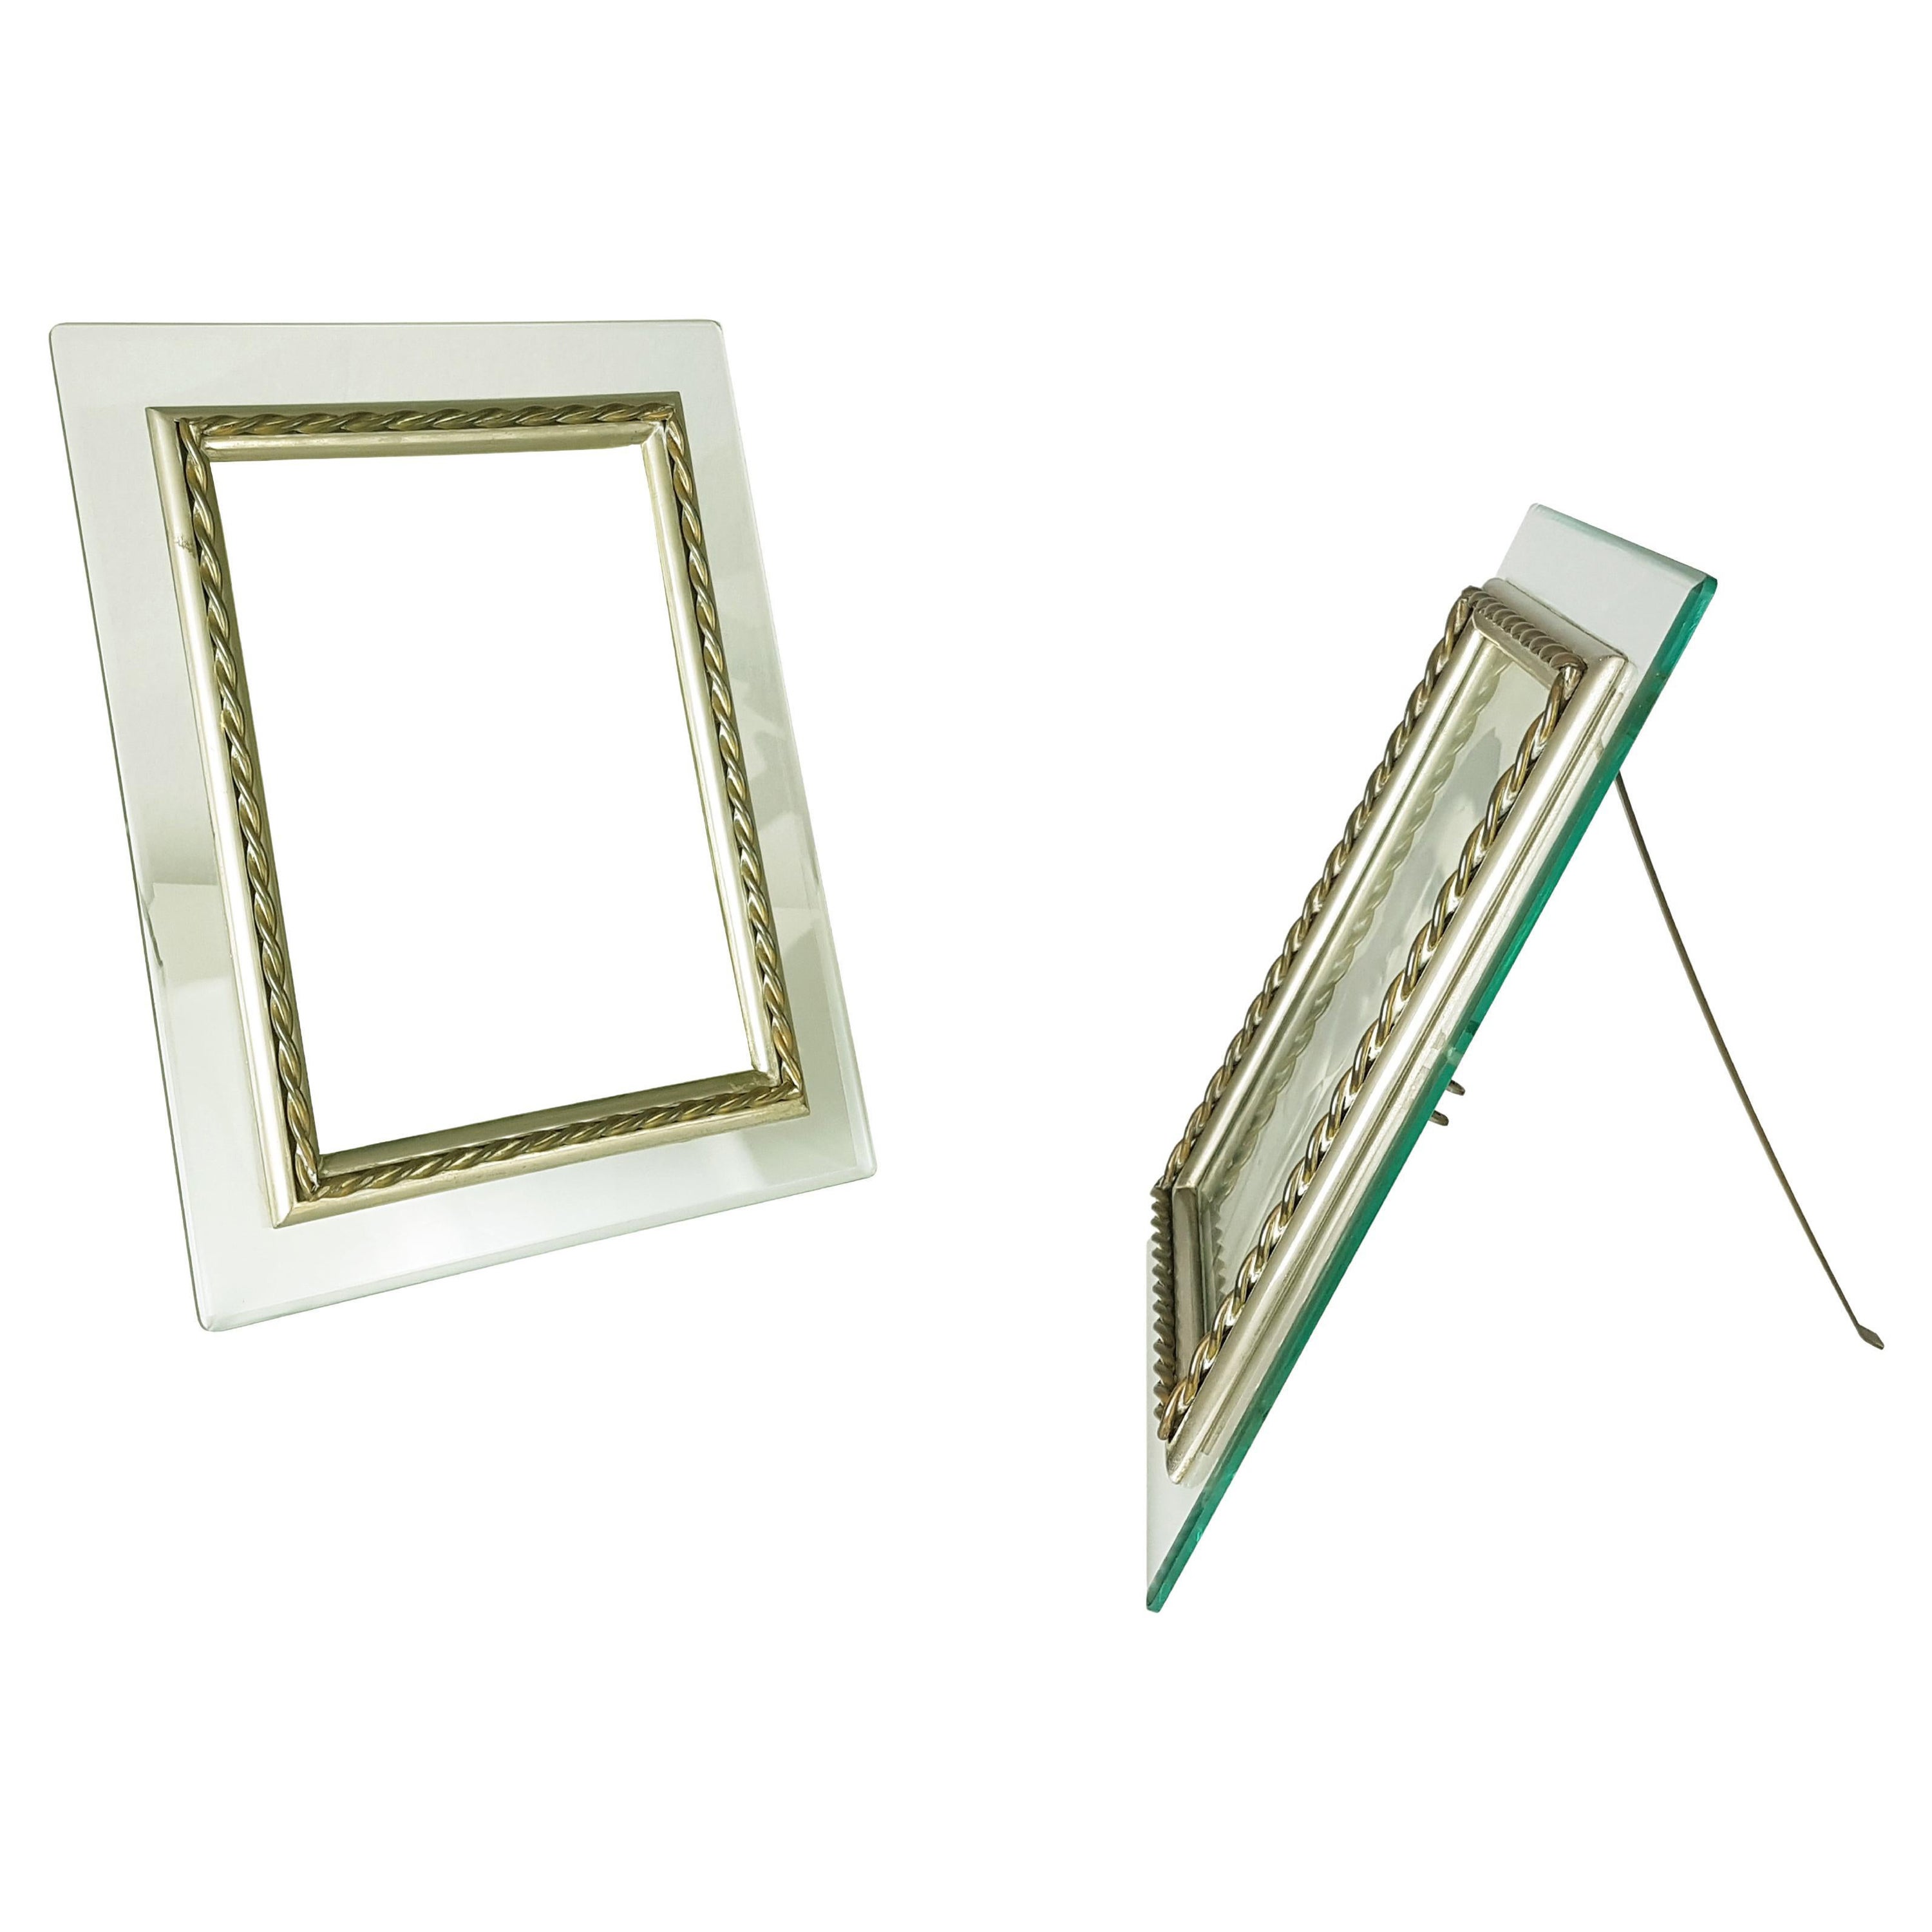 Large Nickel-Plated, Brass & Glass Mid-Century Modern Picture Frames, Set of 2 For Sale